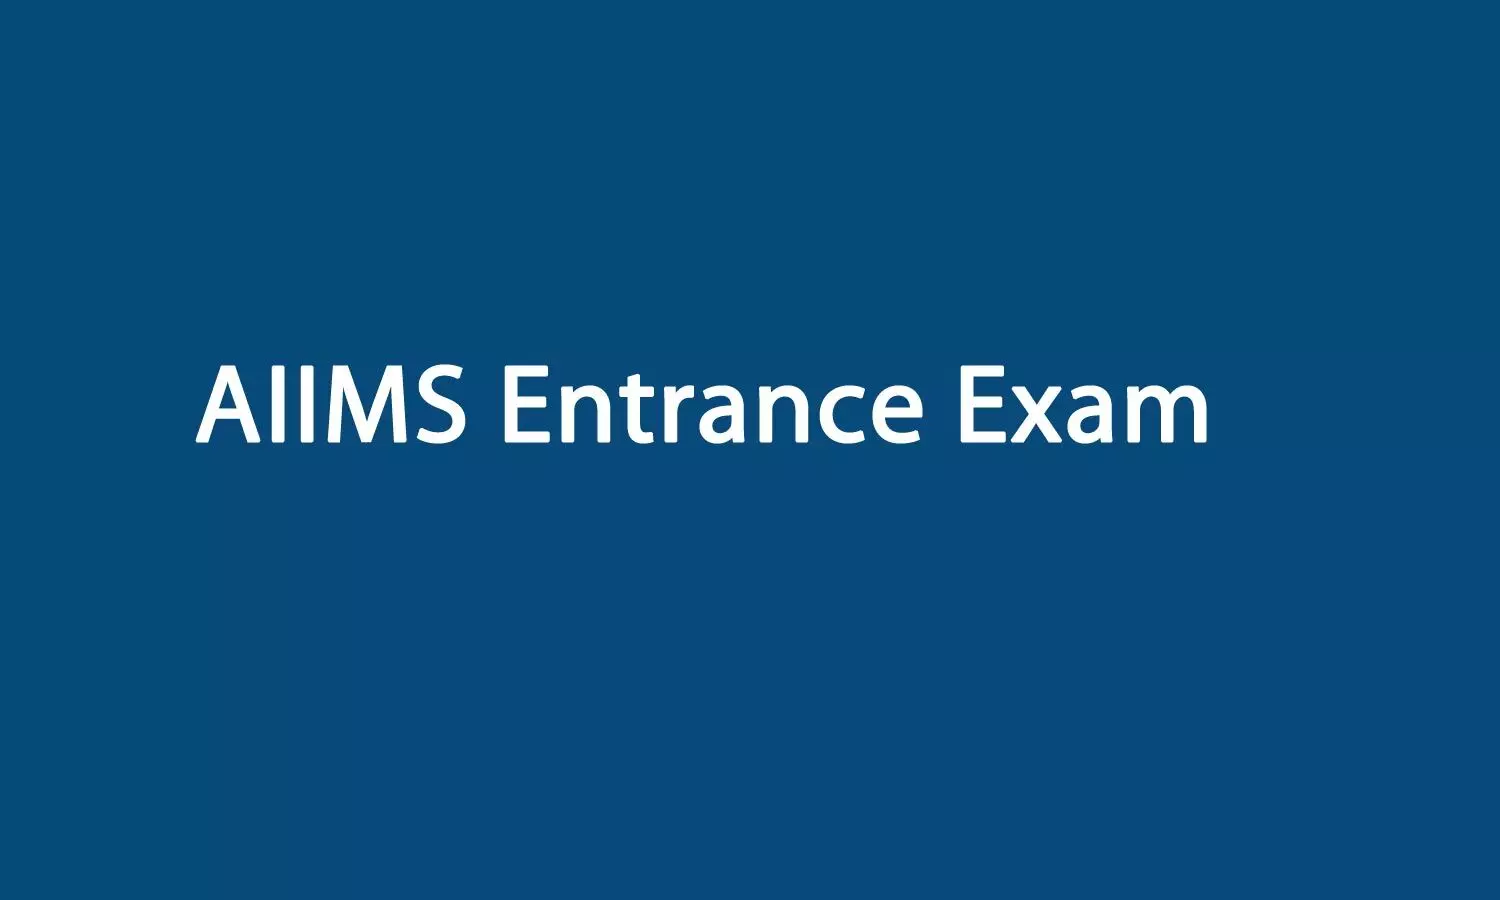 AIIMS notifies on Choice of City for Fellowship Programme Entrance Exam January 2021 session